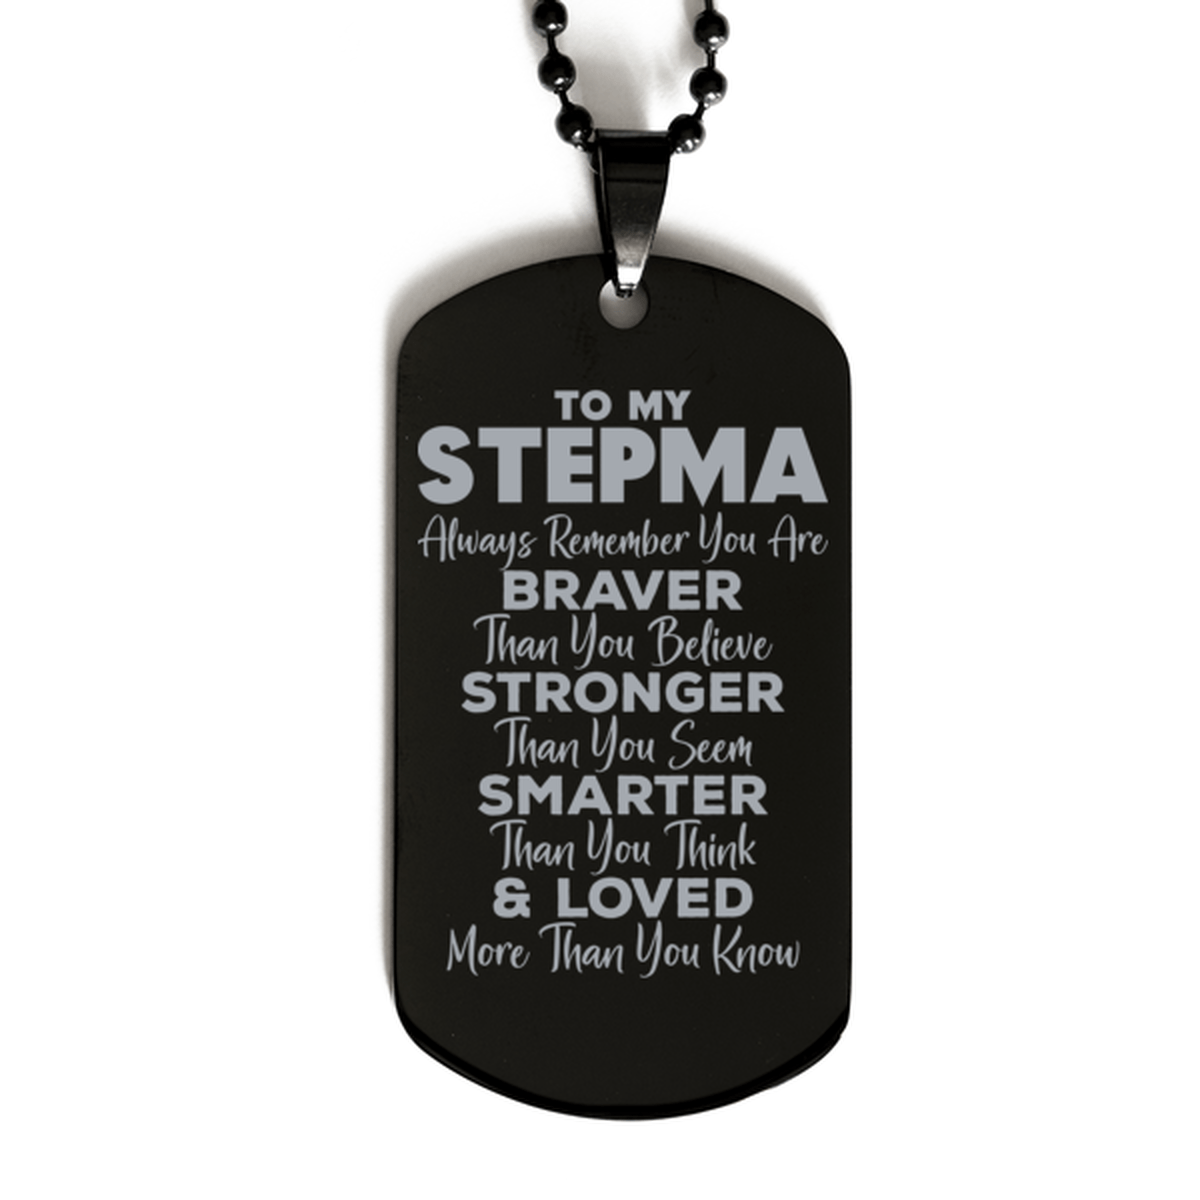 Motivational Stepma Black Dog Tag Necklace, Stepma Always Remember You Are Braver Than You Believe, Best Birthday Gifts for Stepma